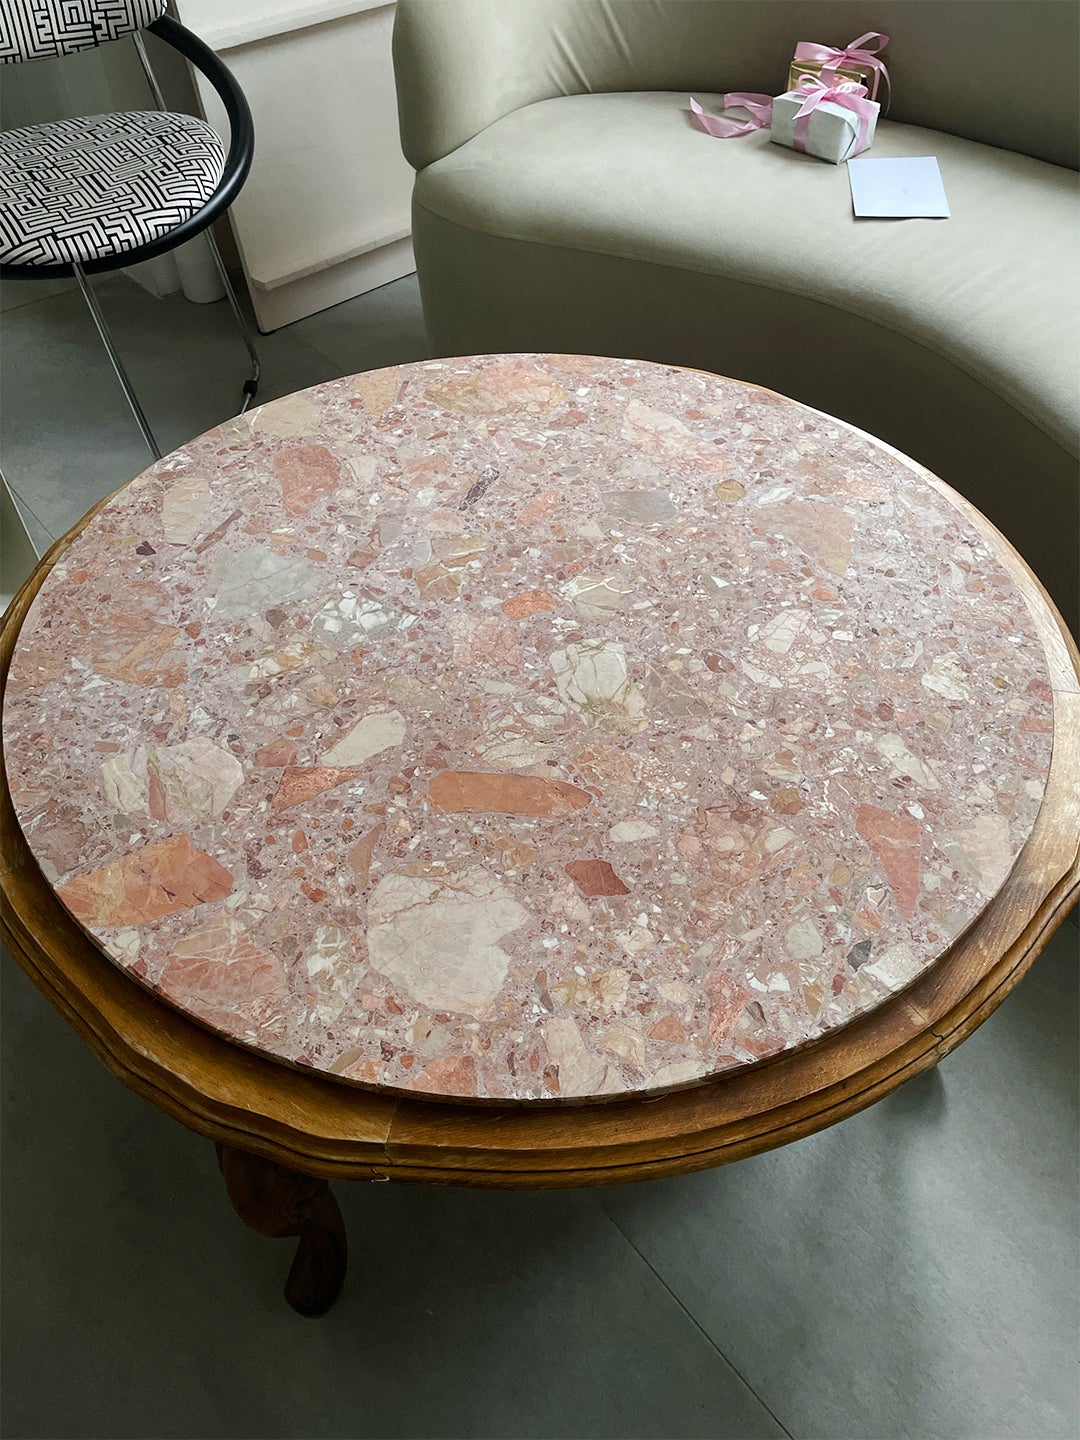 pink marble on wood table